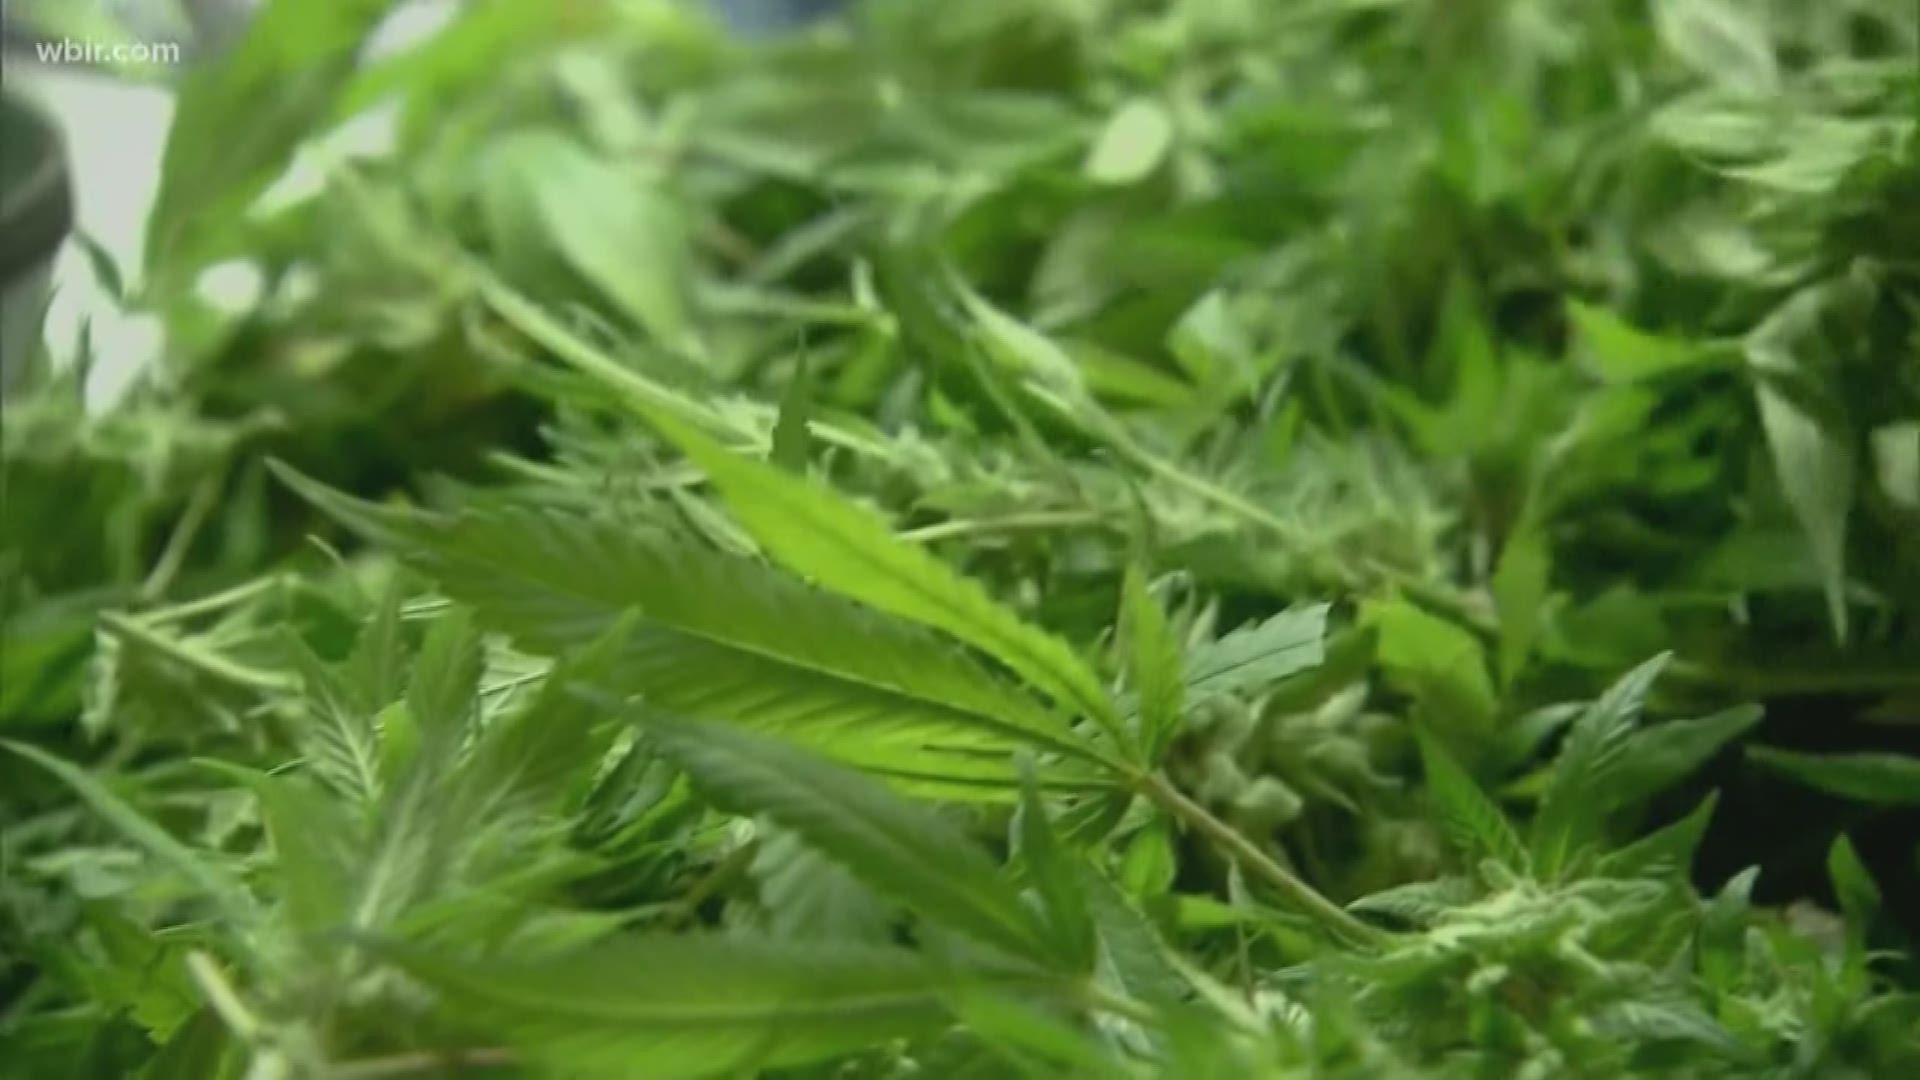 Republican state lawmakers filed a bill that would legalize all forms of medical marijuana across the state.